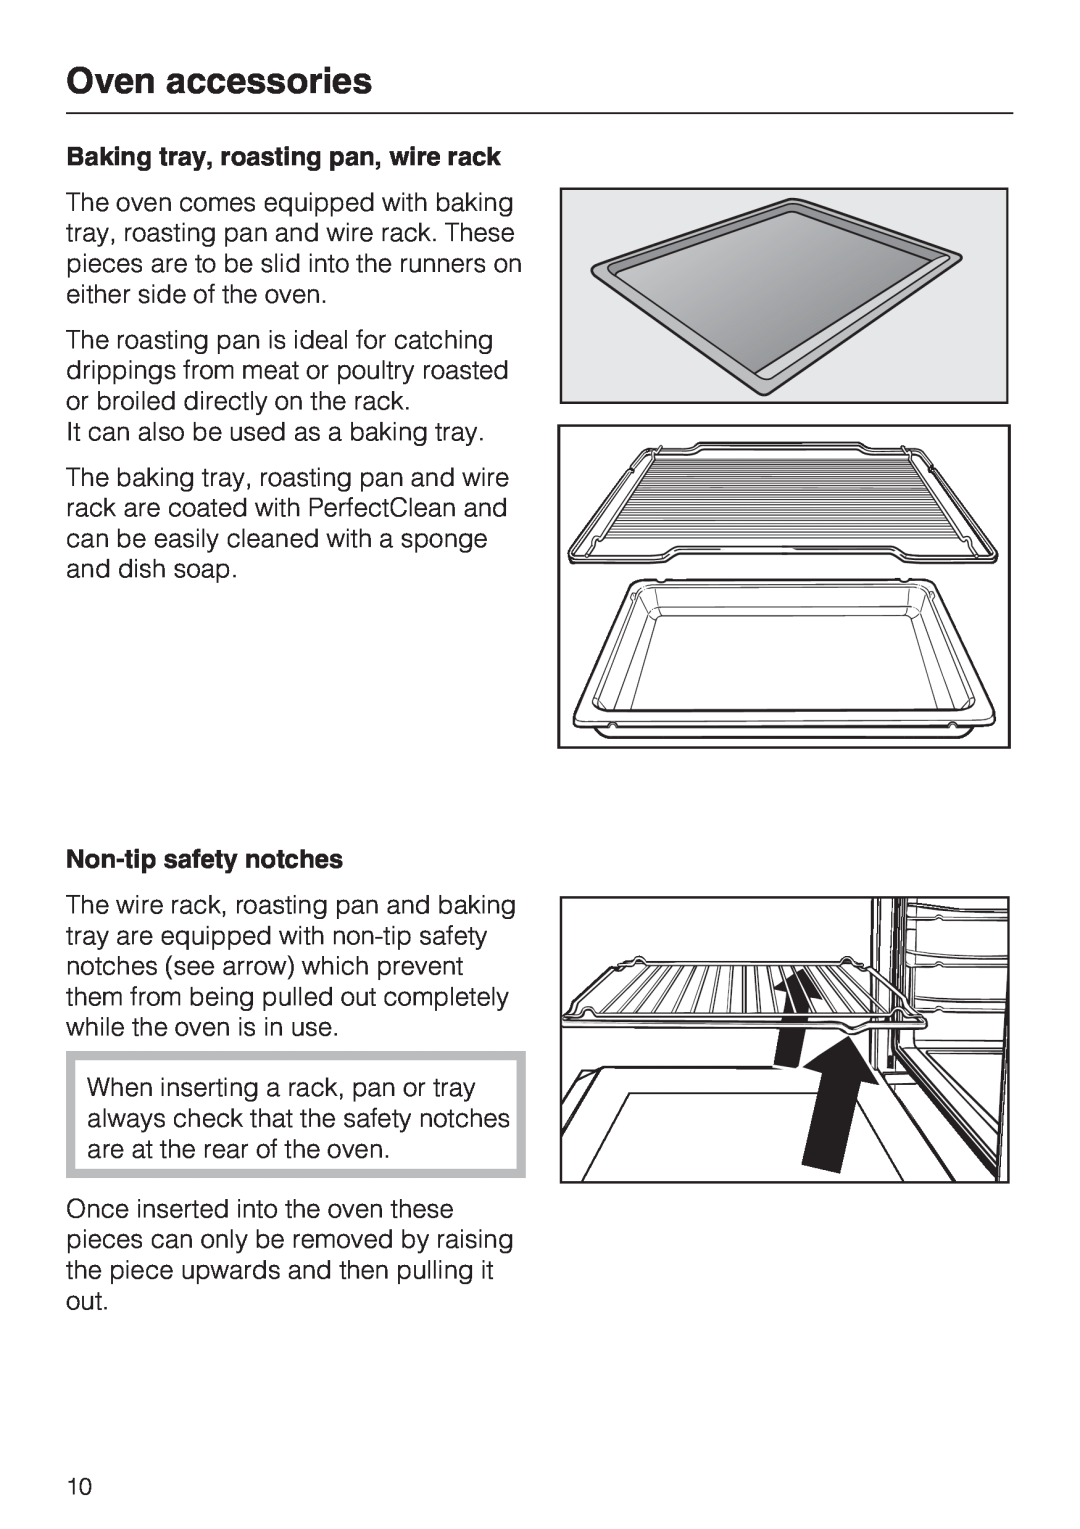 Miele H 4242 B installation instructions Oven accessories, Baking tray, roasting pan, wire rack, Non-tipsafety notches 